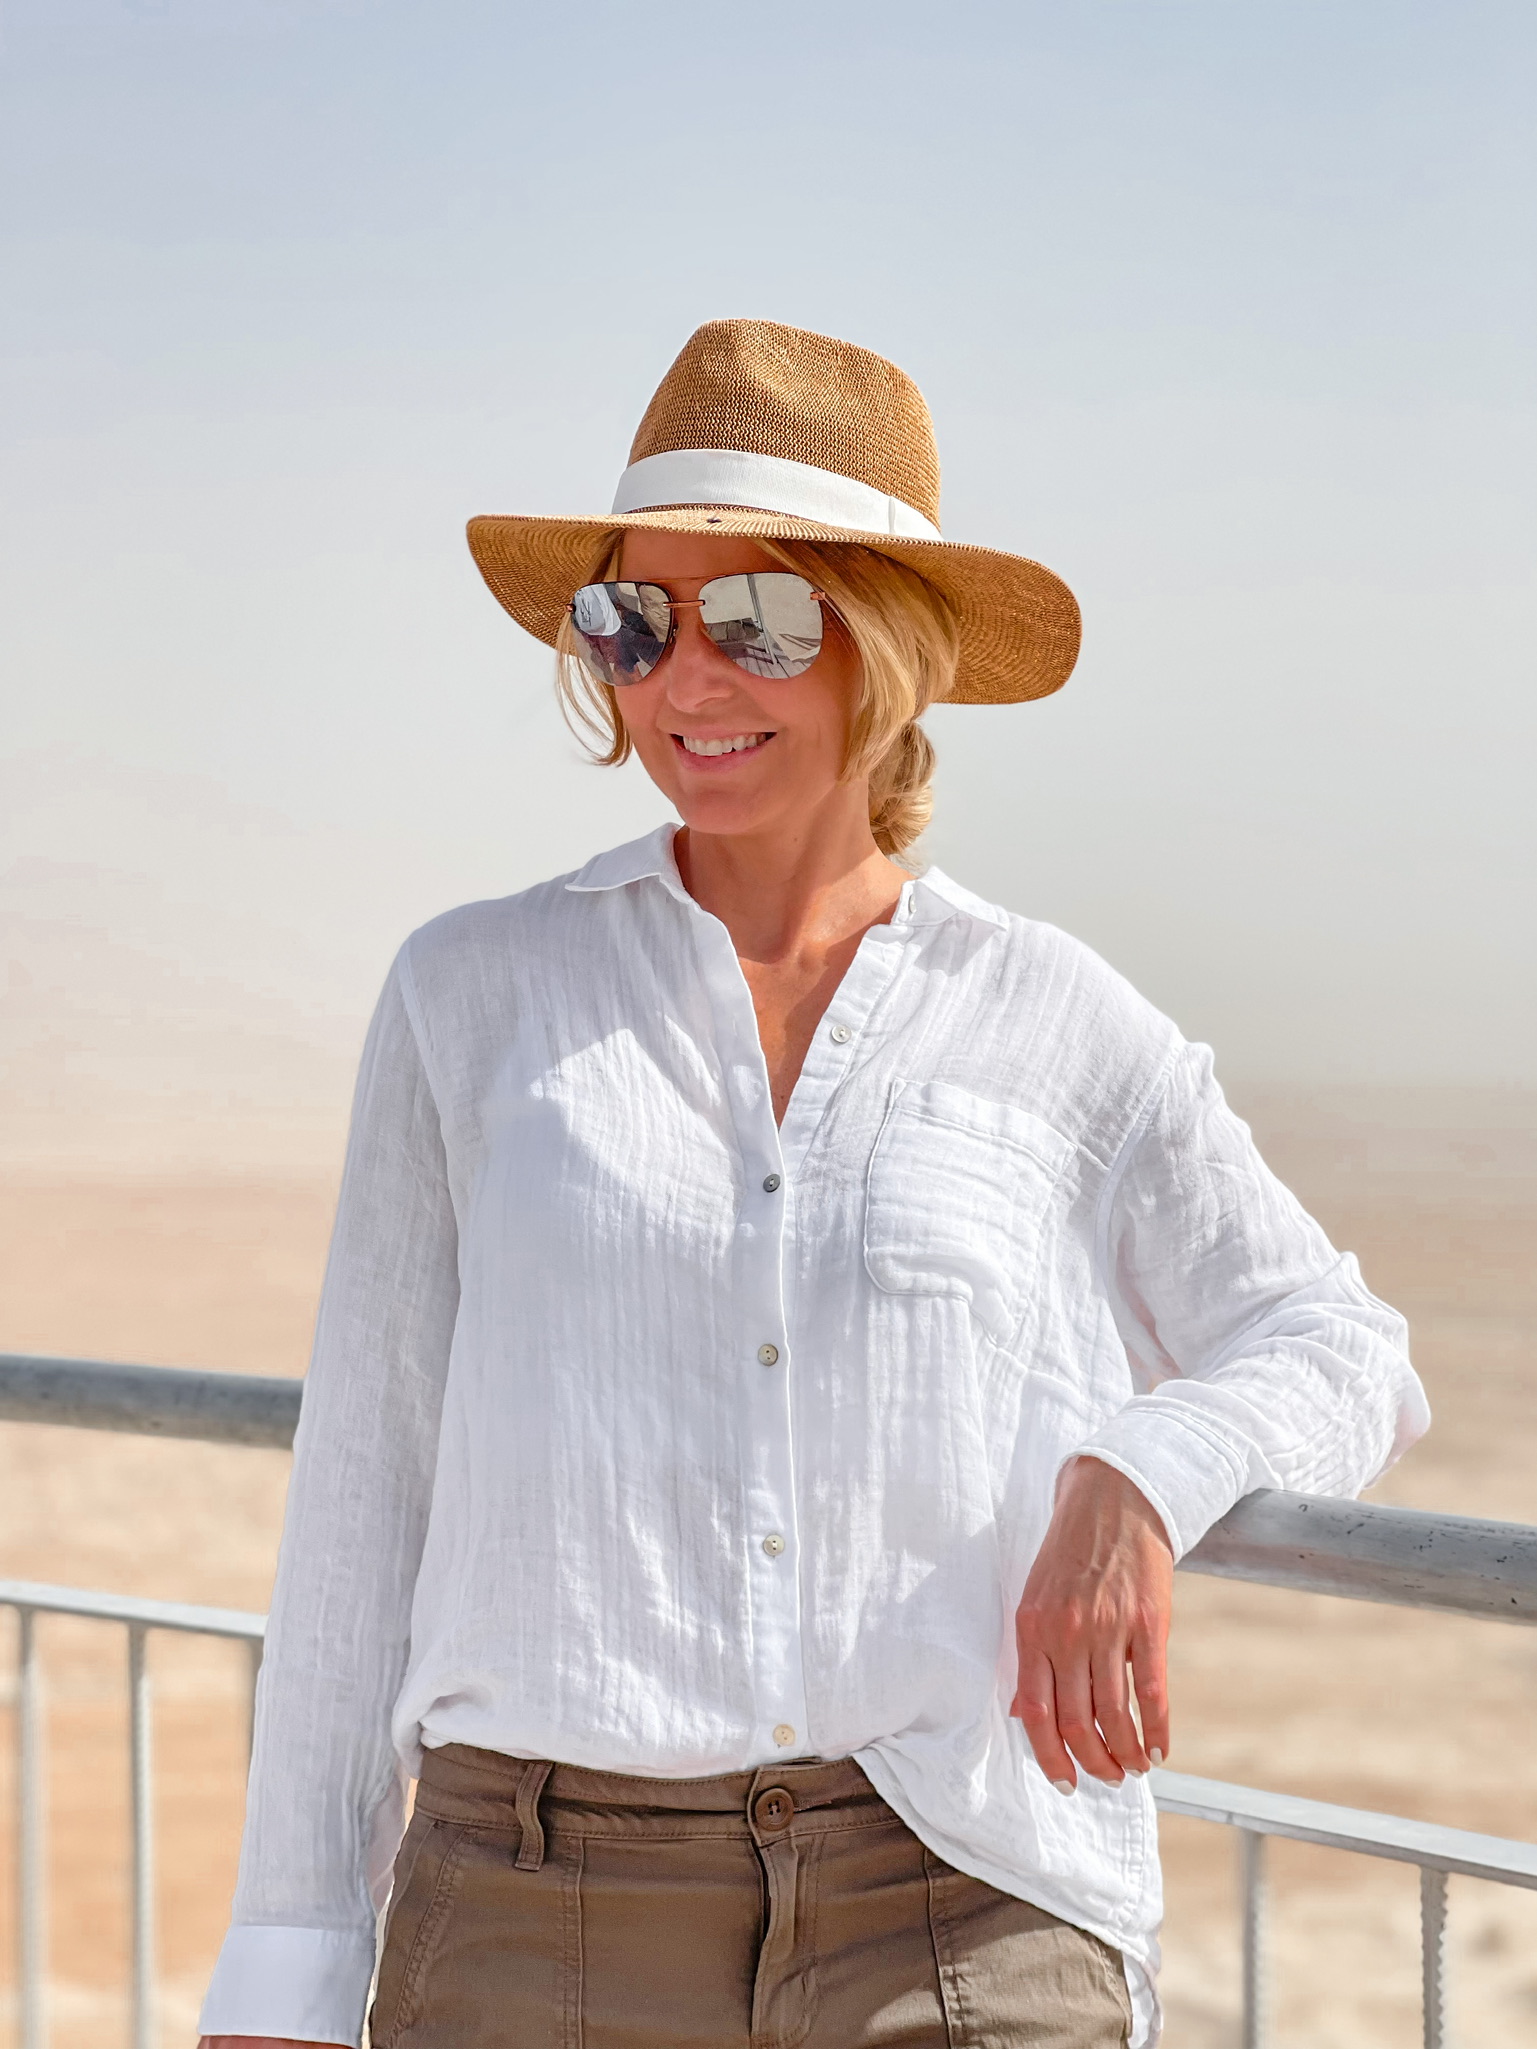 how to dress in middle east, womens dress code in middle east, middle eastern dress female, how to blend in in the middle east, shoes to wear in middle east, what to wear in middle east, how to look stylish in middle east, erin busbee, busbee style, hiking masada, hiking in west bank, rails cotton ellis shirt, backcountry green shorts, quay aviator sunglasses, hariatt isles hat, chloe sneakers